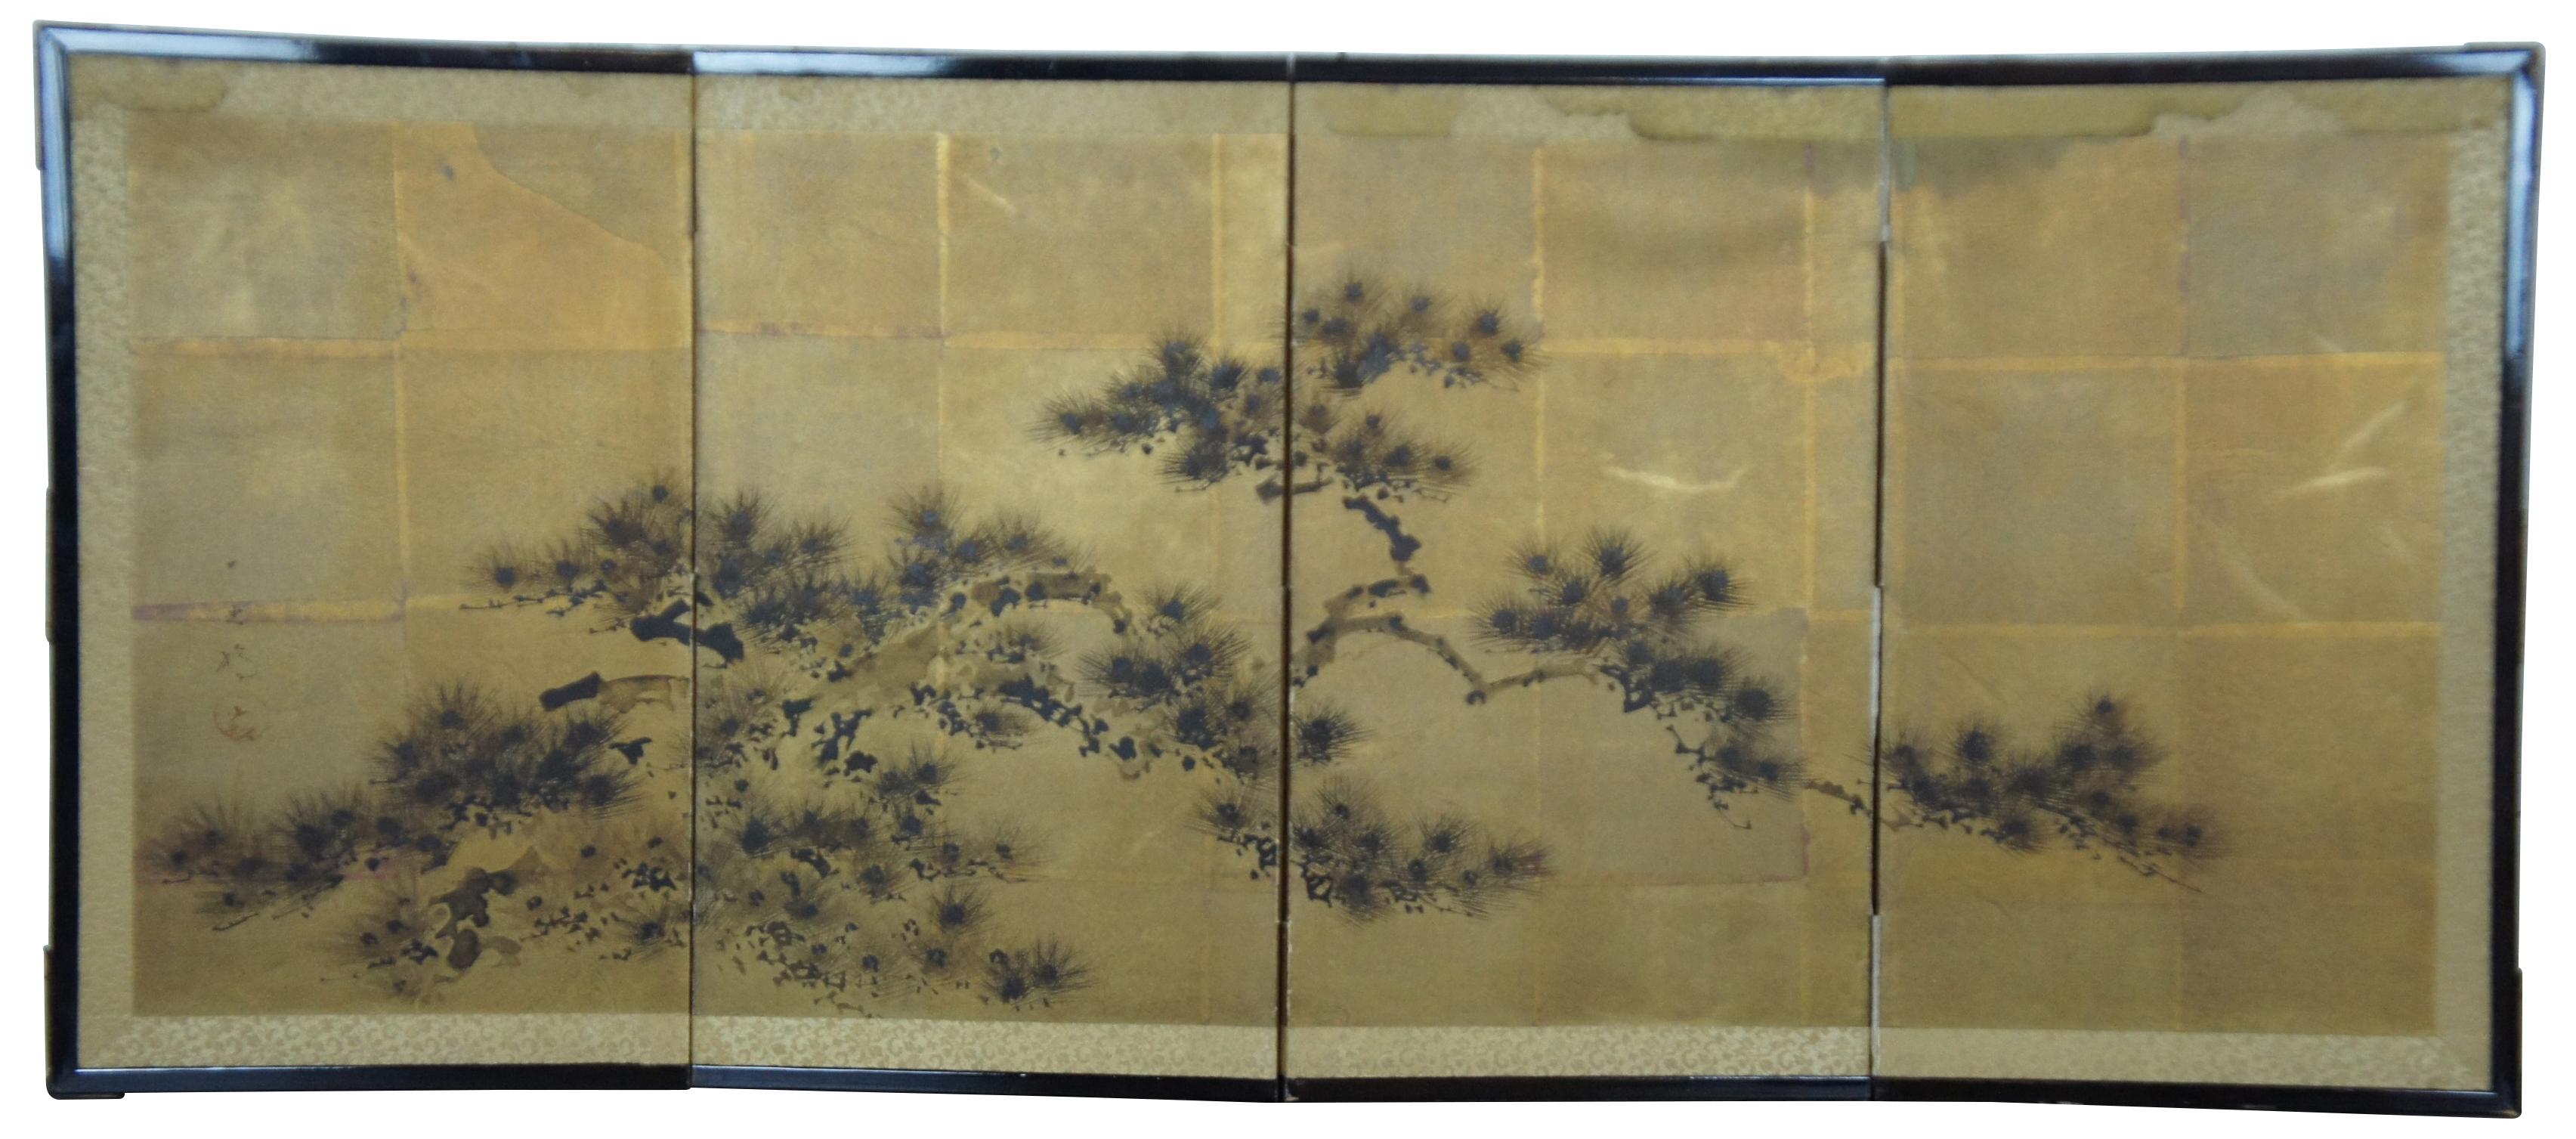 Vintage hand painted Japanese byobu four panel folding screen featuring a gnarled pine tree on a gold ground. Signed on the far left panel. Set in a black lacquer frame with printed paper backing. Measure: 44”.
 